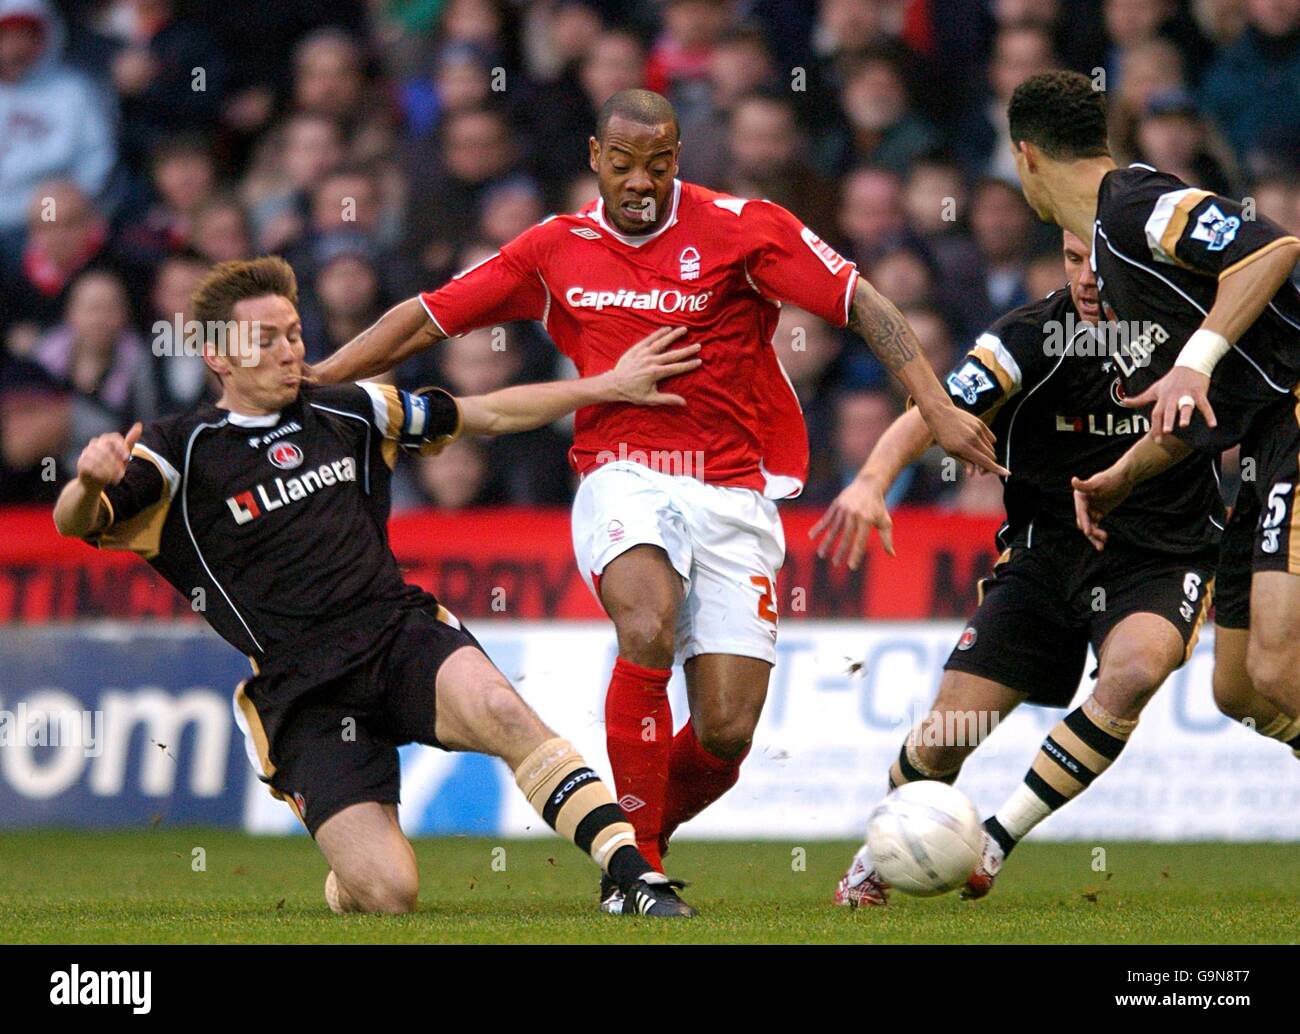 Soccer - FA Cup - Third Round - Nottingham Forest v Charlton Athletic - City Ground. Charlton Athletic's Matthew Holland tackles Nottingham Forest's Junior Agogo (centre) Stock Photo